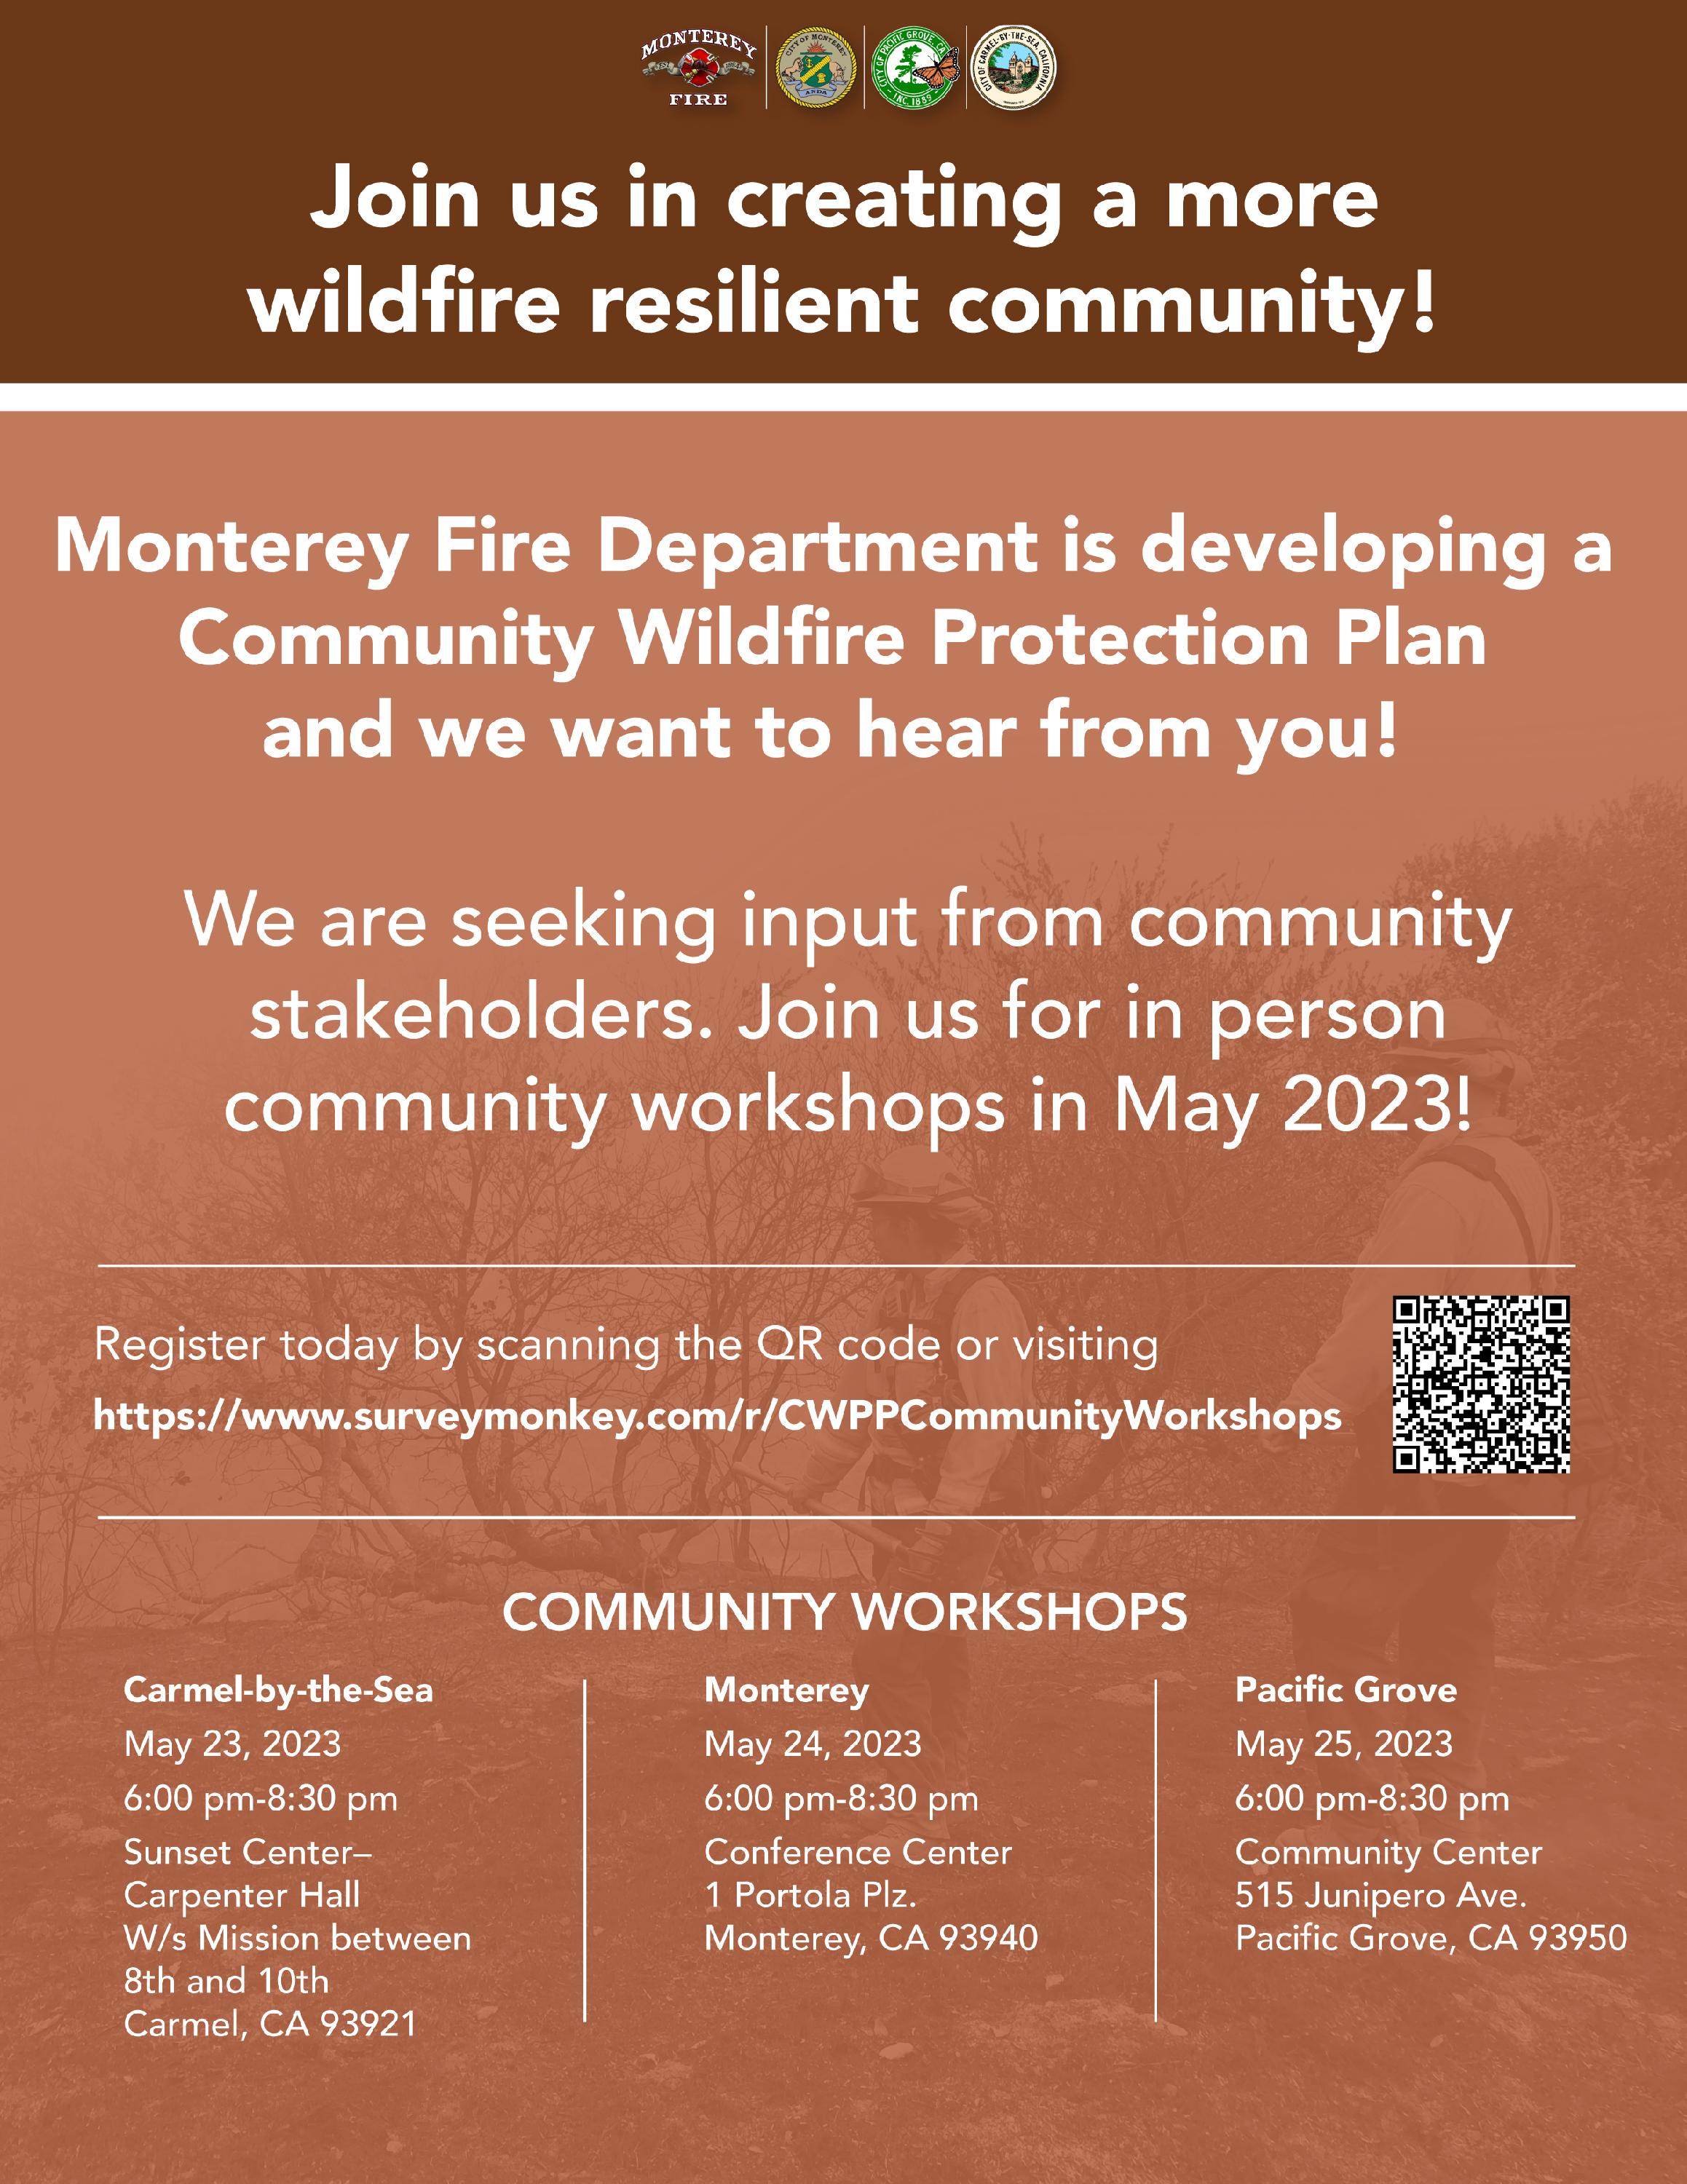 Community workshops to develop a community wildfire protection plan